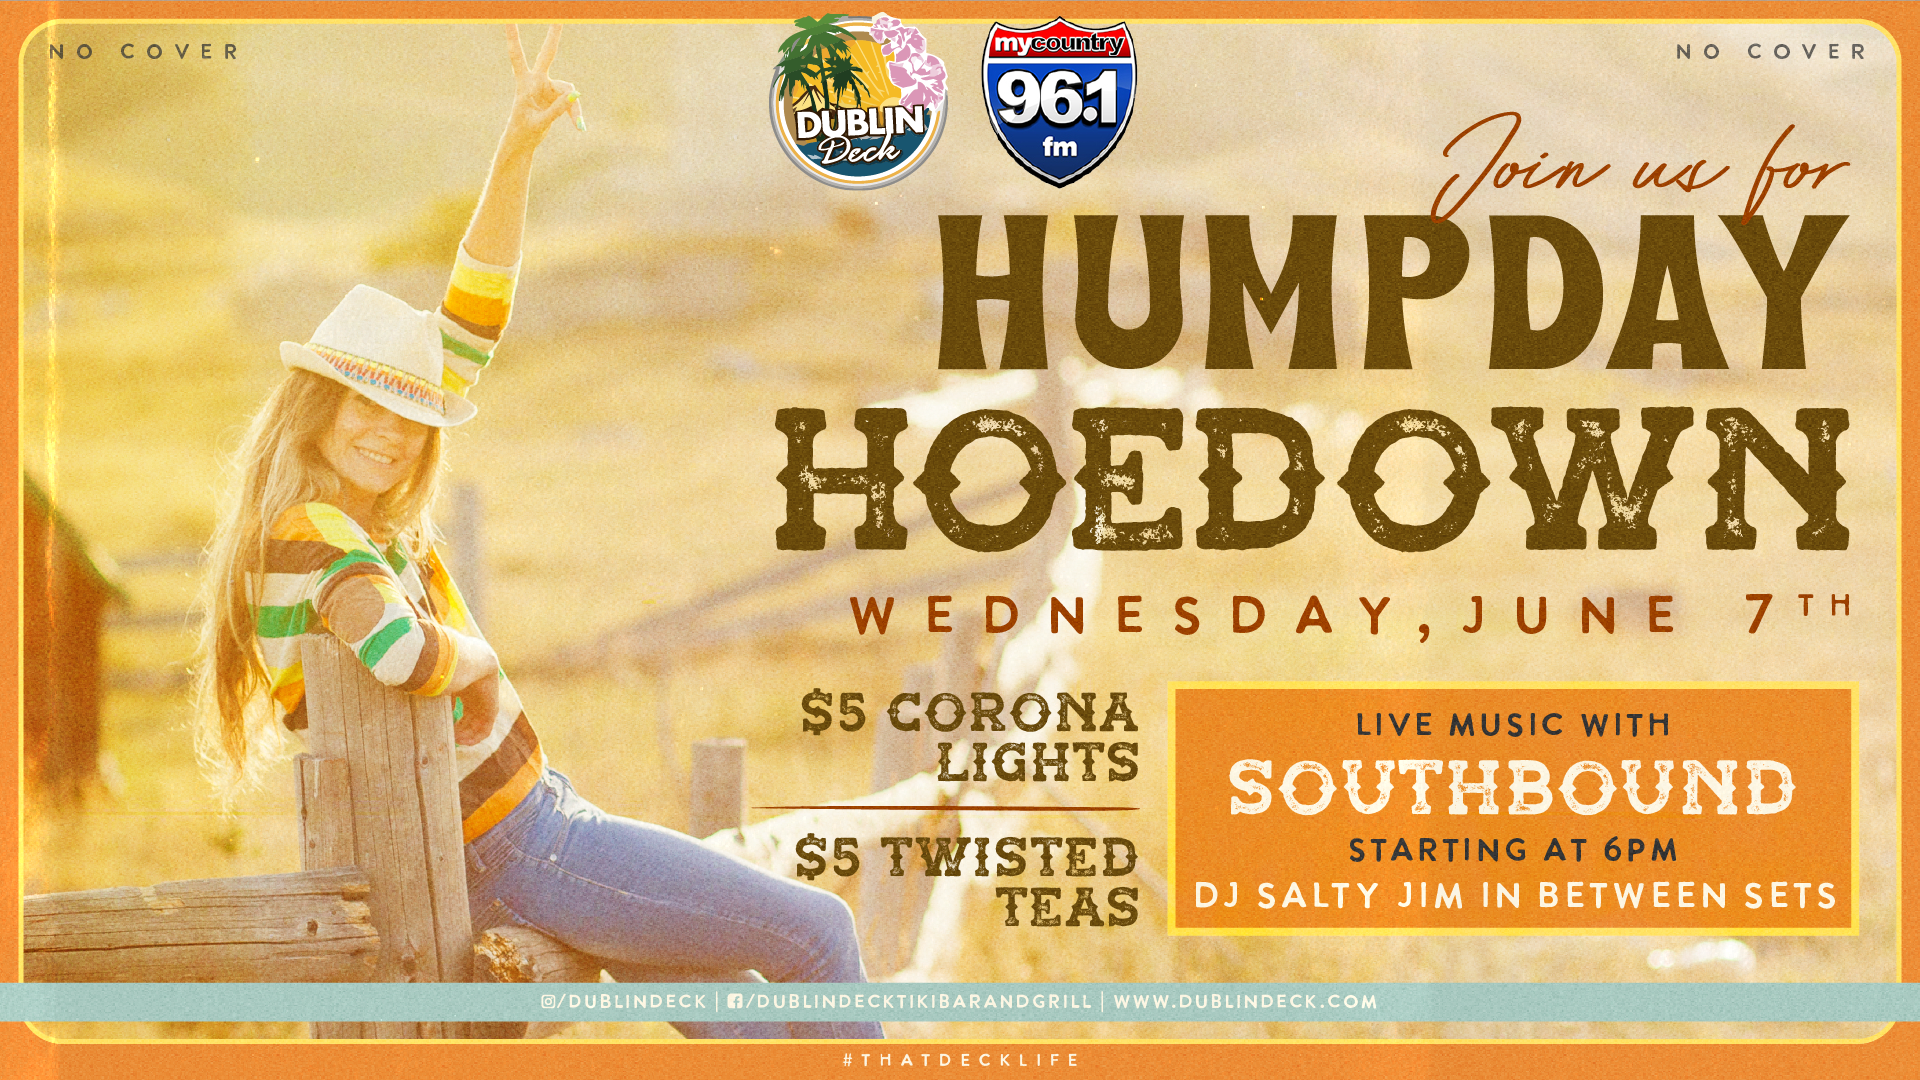 Saddle up for Humpday Hoedown with Southbound! Music starts at 6PM